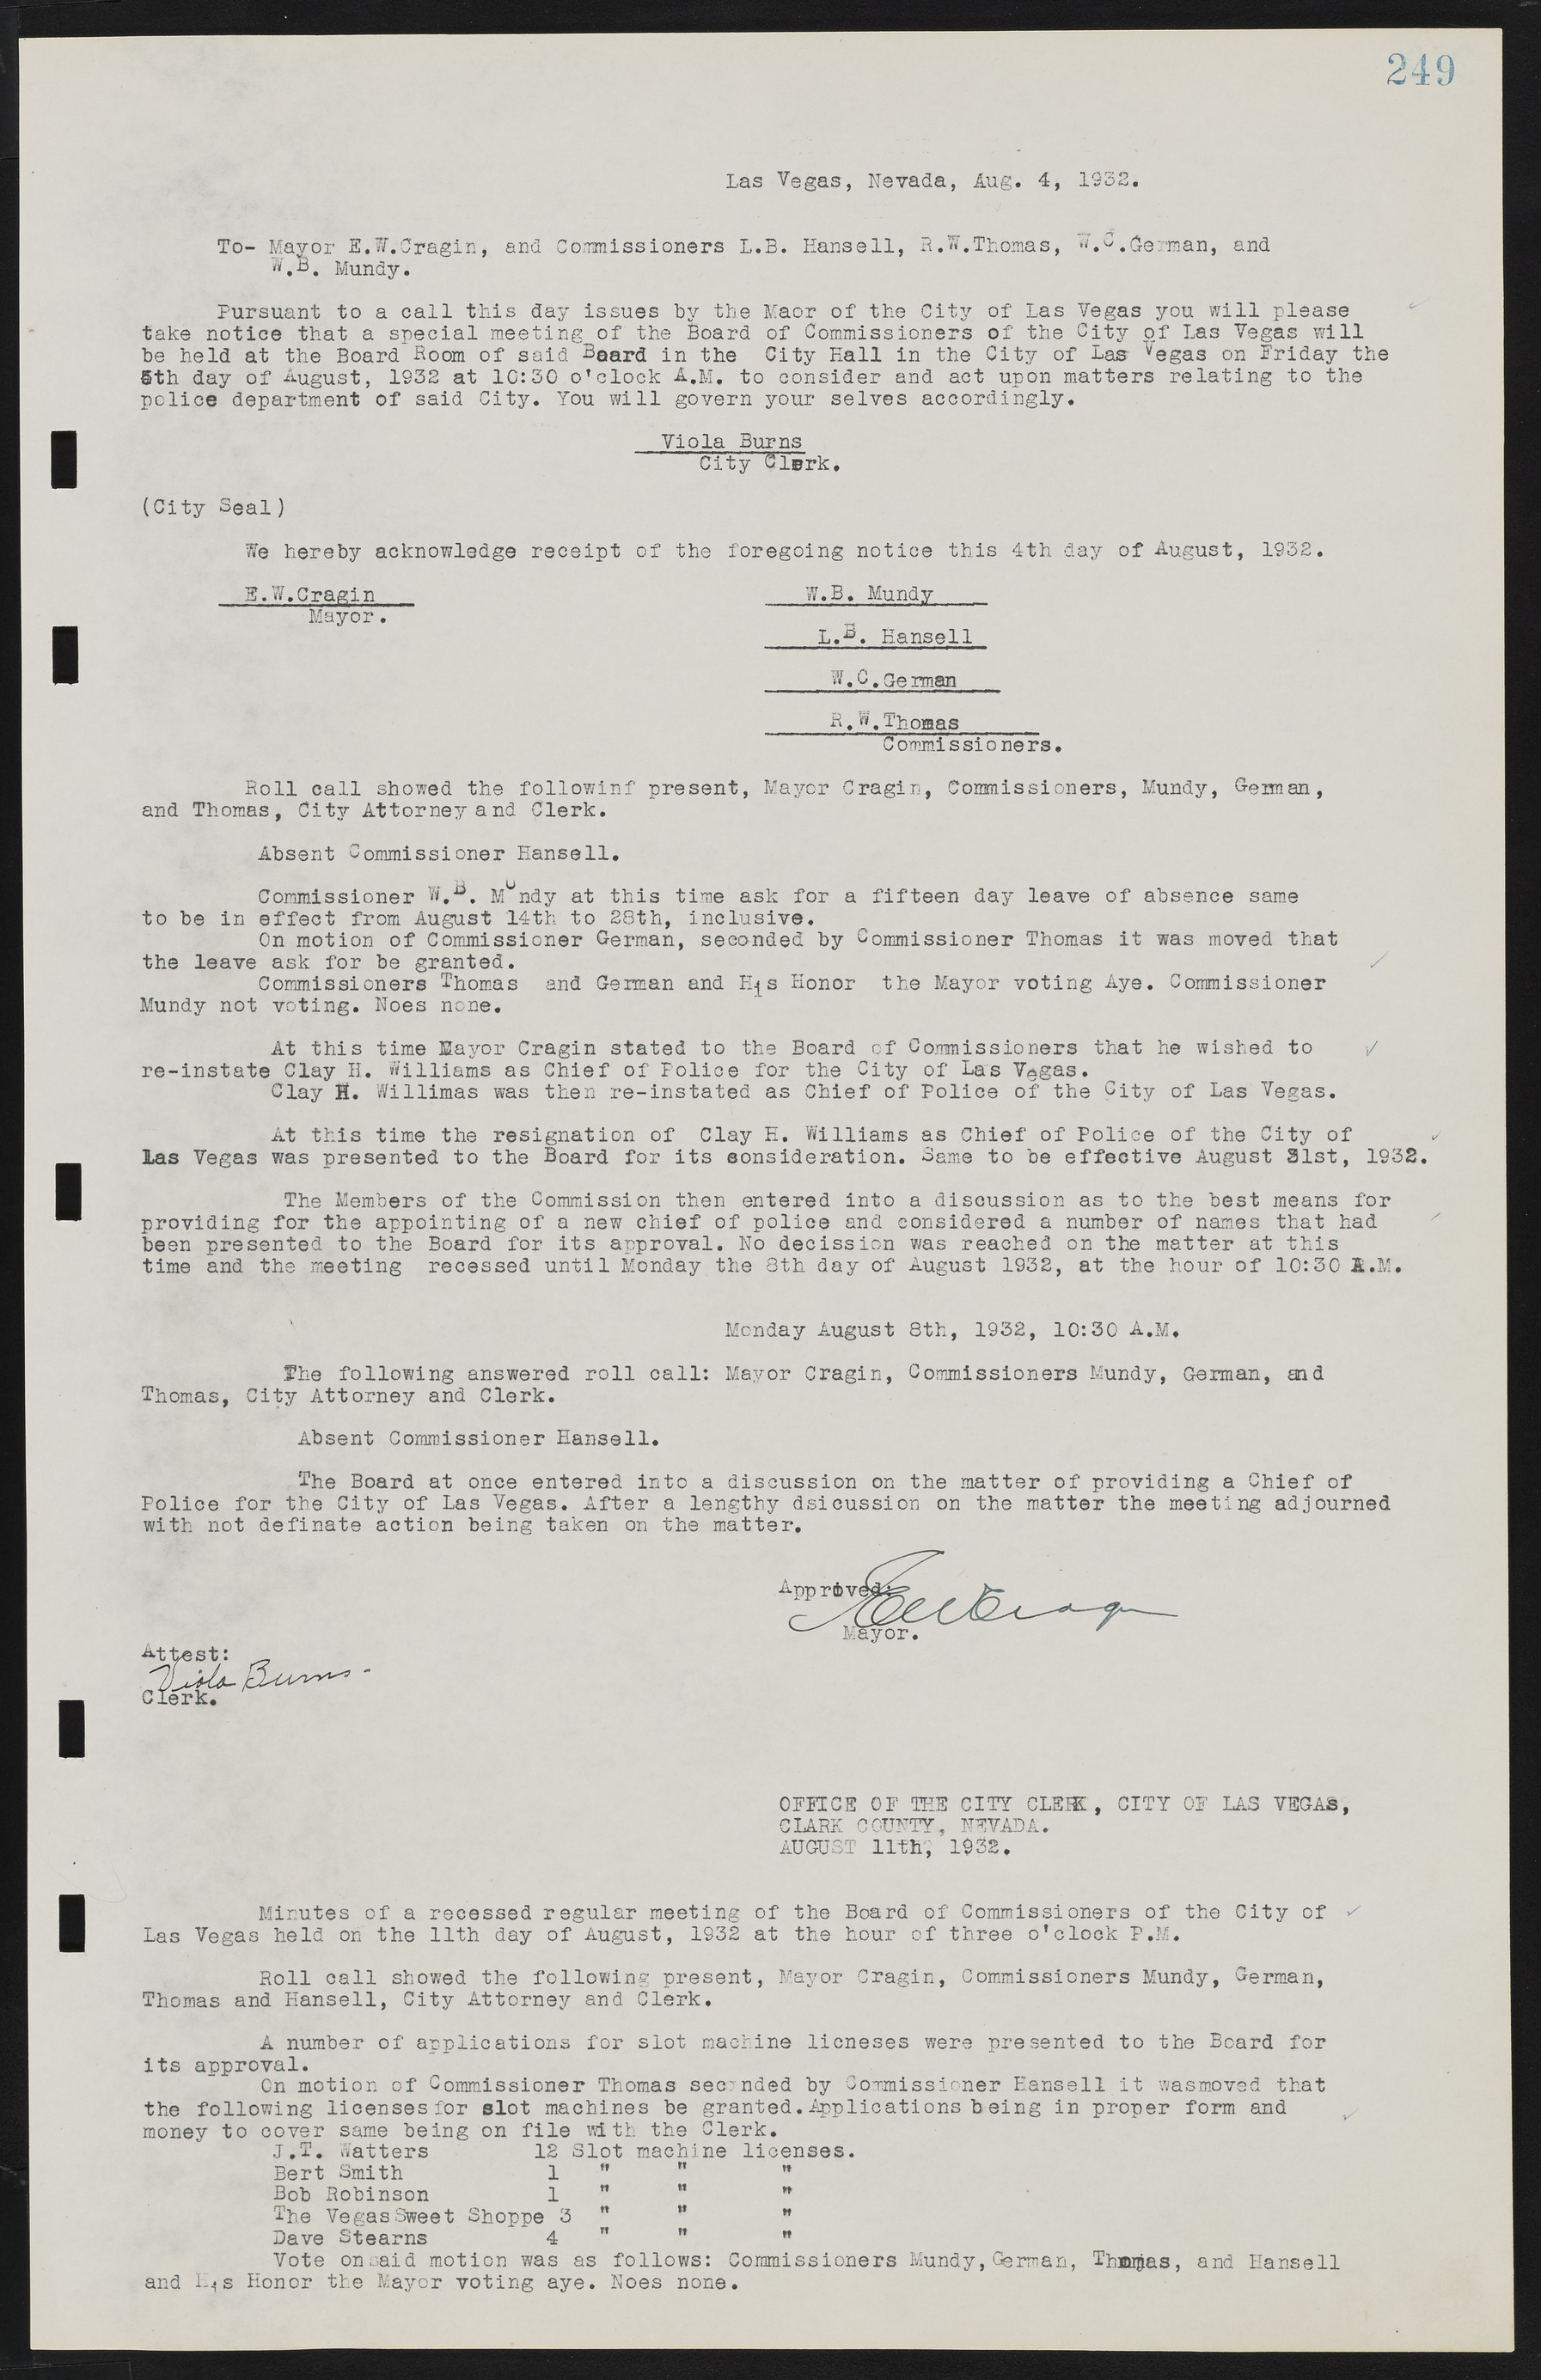 Las Vegas City Commission Minutes, May 14, 1929 to February 11, 1937, lvc000003-255